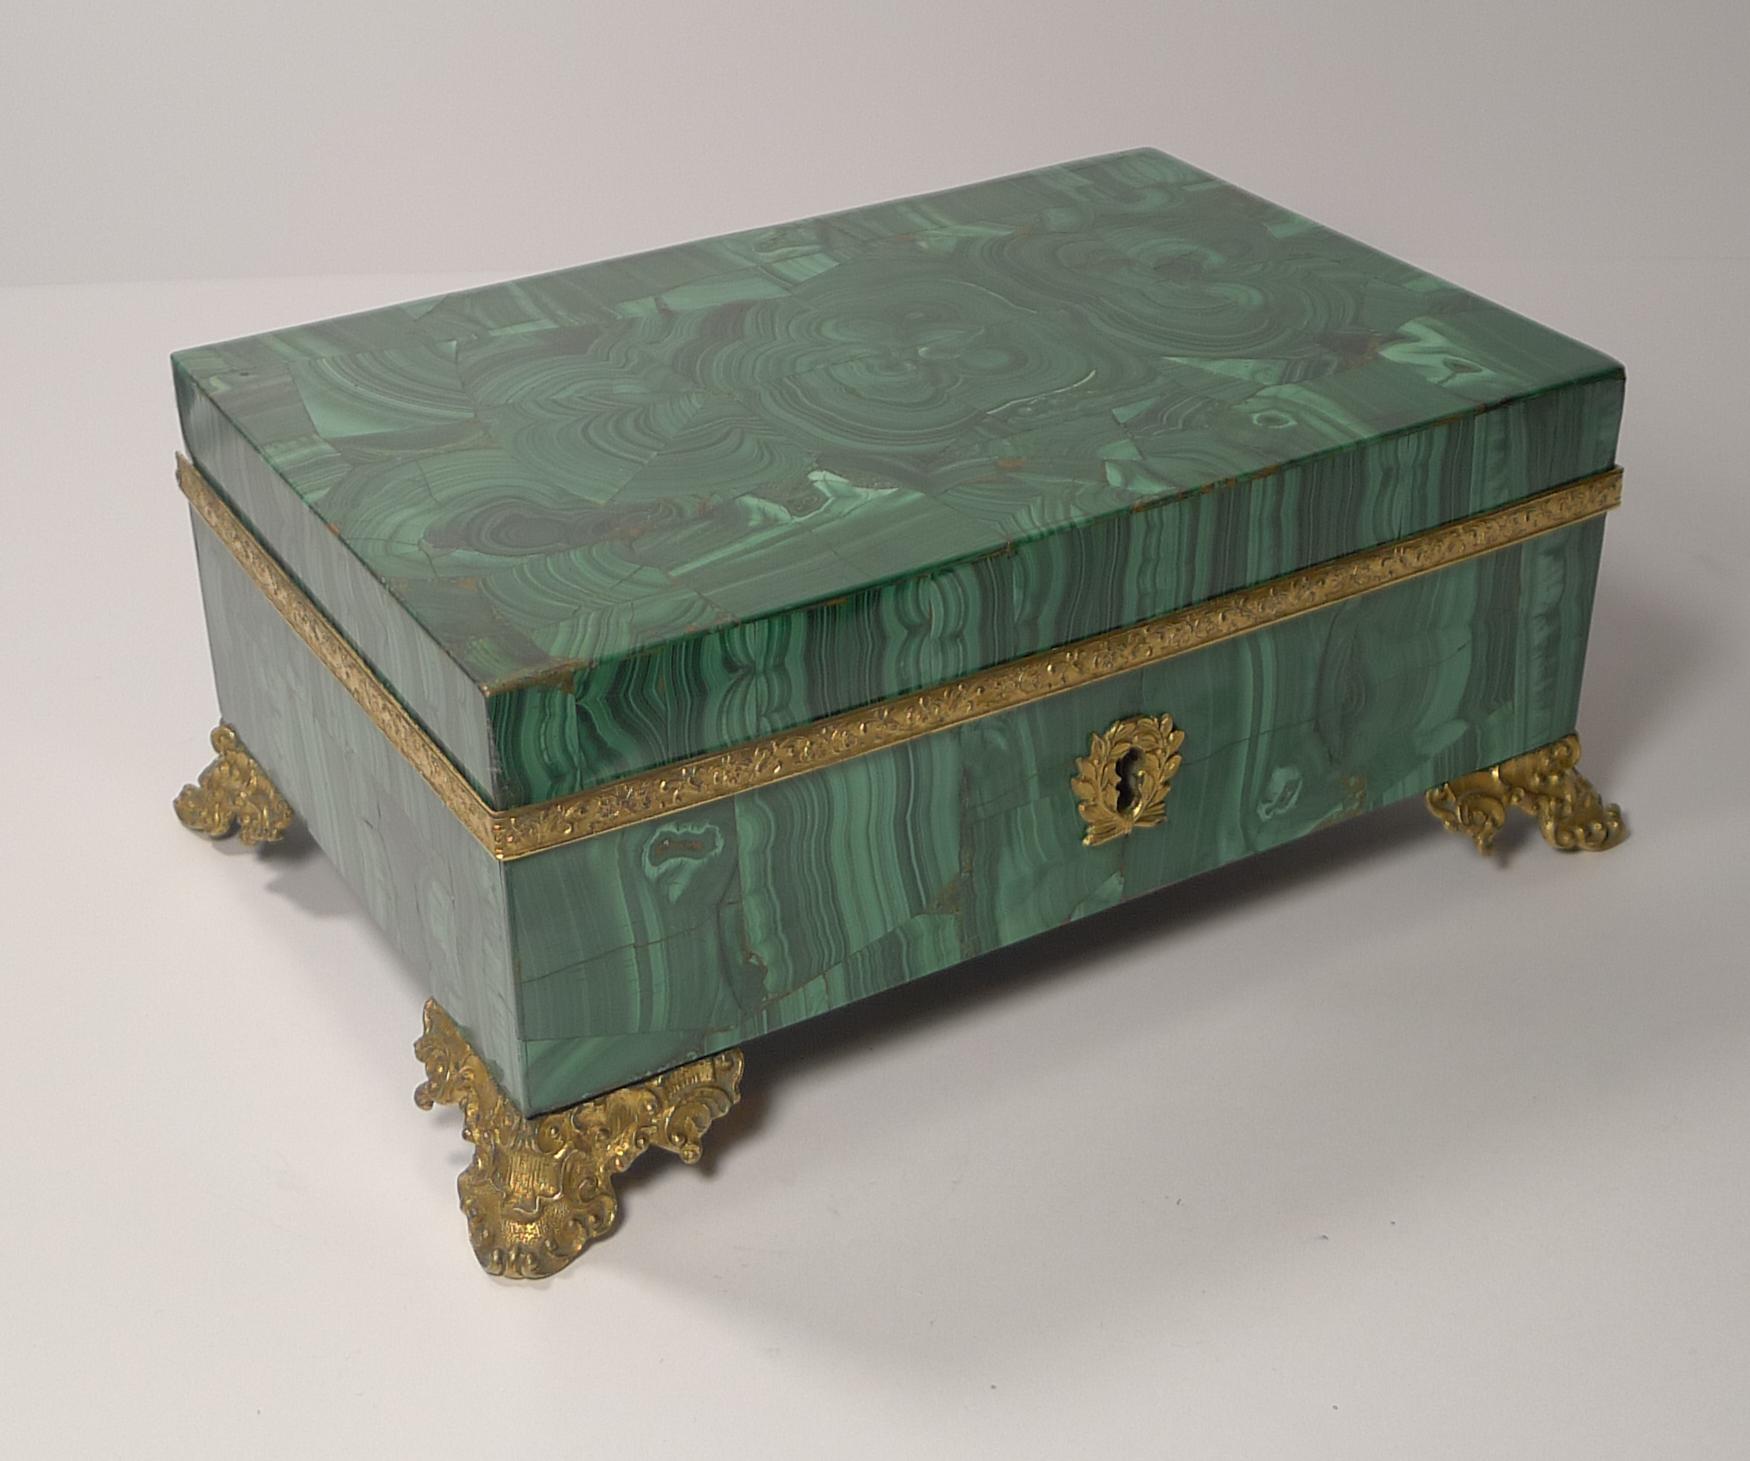 A magnificent French late 19th century Malachite jewelry box dating to circa 1890-1900, one of the best examples I have come across.

The Malachite during this era was aggressively mined in the Ural Mountains of Russia so I suspect the this stone